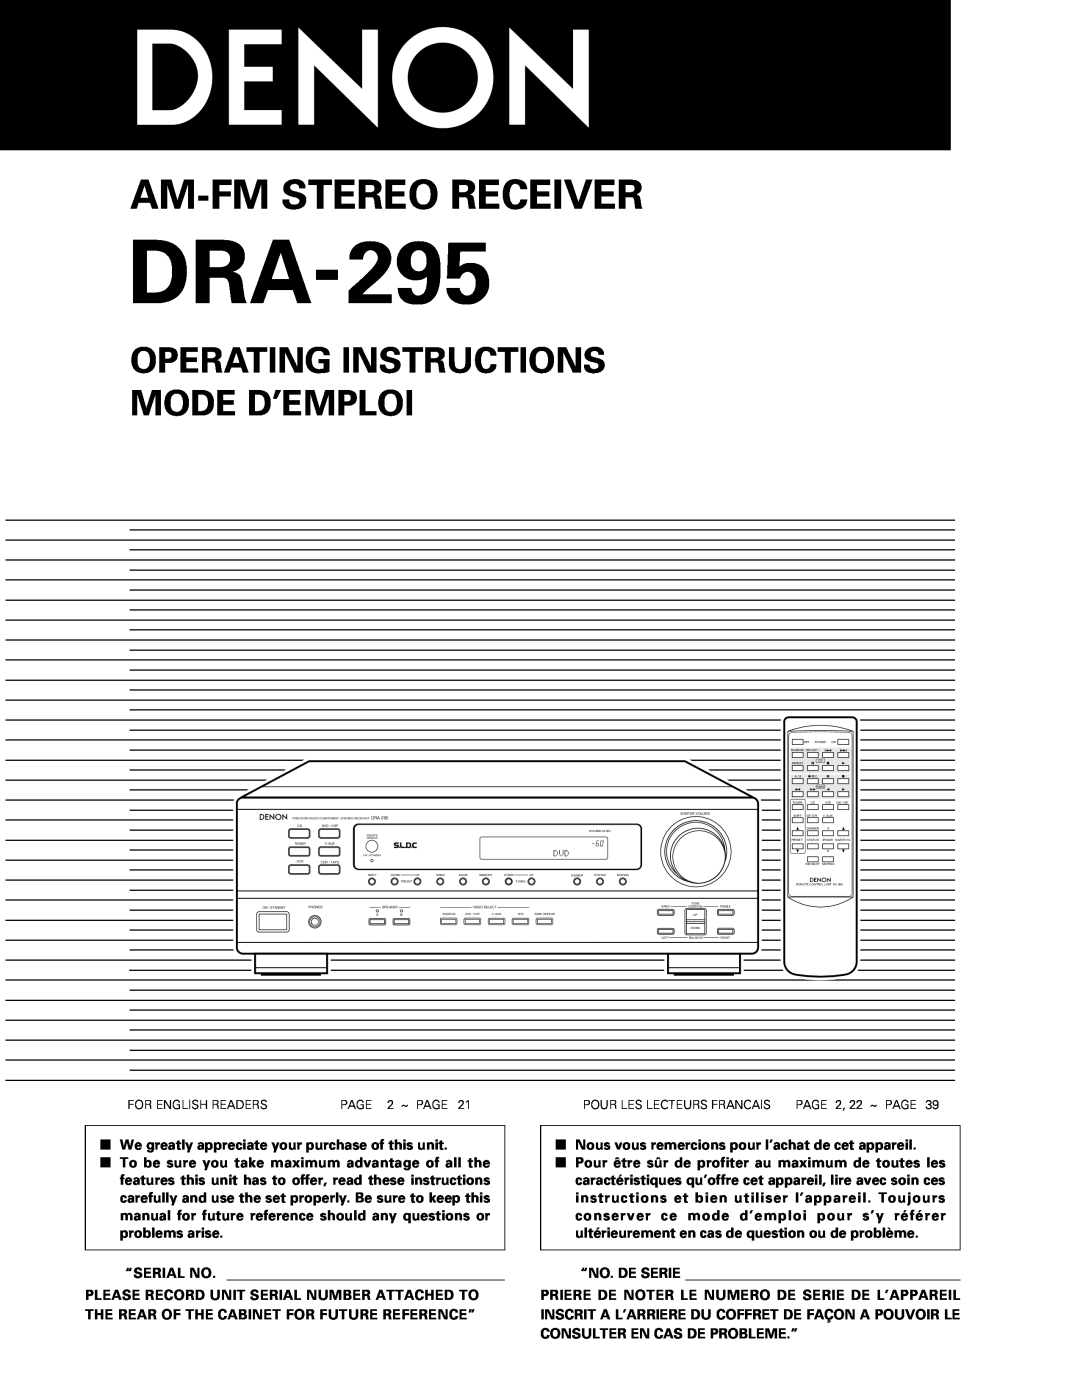 Denon DRA-295 manual Operating Instructions Mode D’Emploi, Am-Fmstereo Receiver 